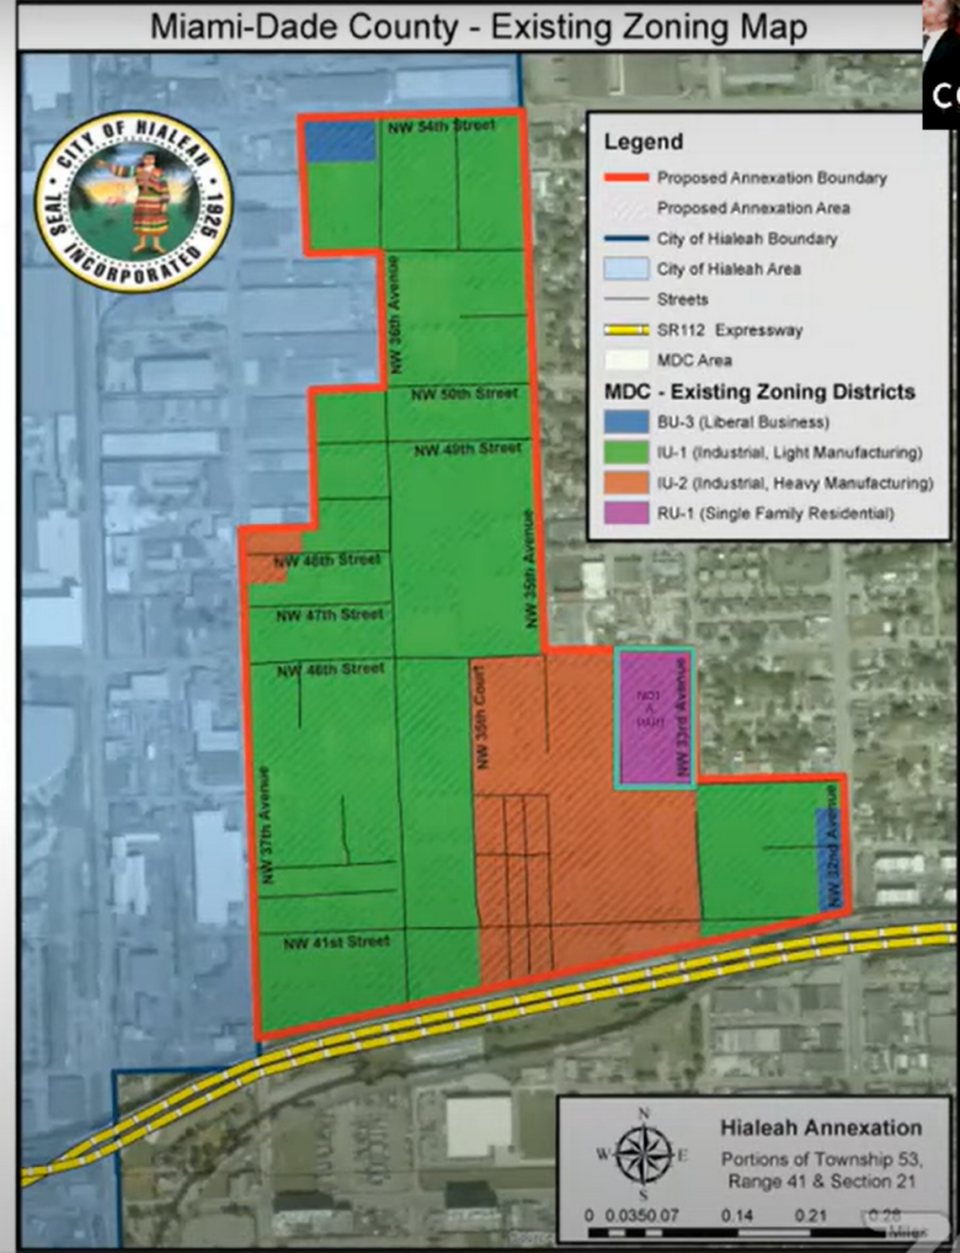 The area in purple on the map was remove from the original plan of annexation, according to the director of The Corradino Group, Edward Ng, engineering firm hired for Hialeah to do the report, it wasn’t suppose to be in the boundaries annex plan